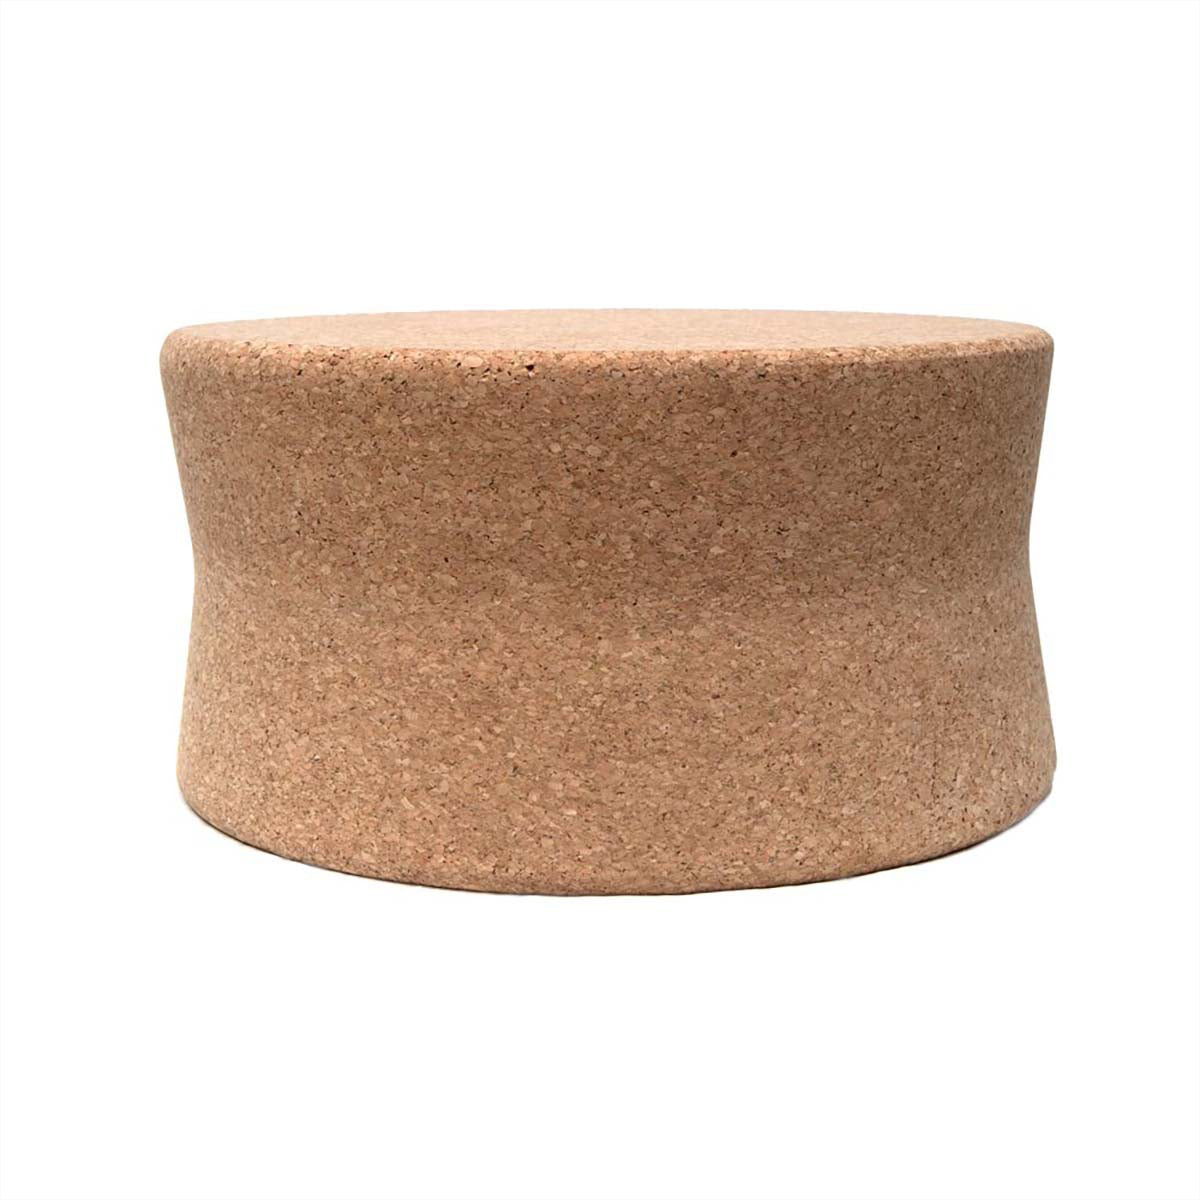 OYOY LIVING Cork Trisse - Low Stool 901 Nature